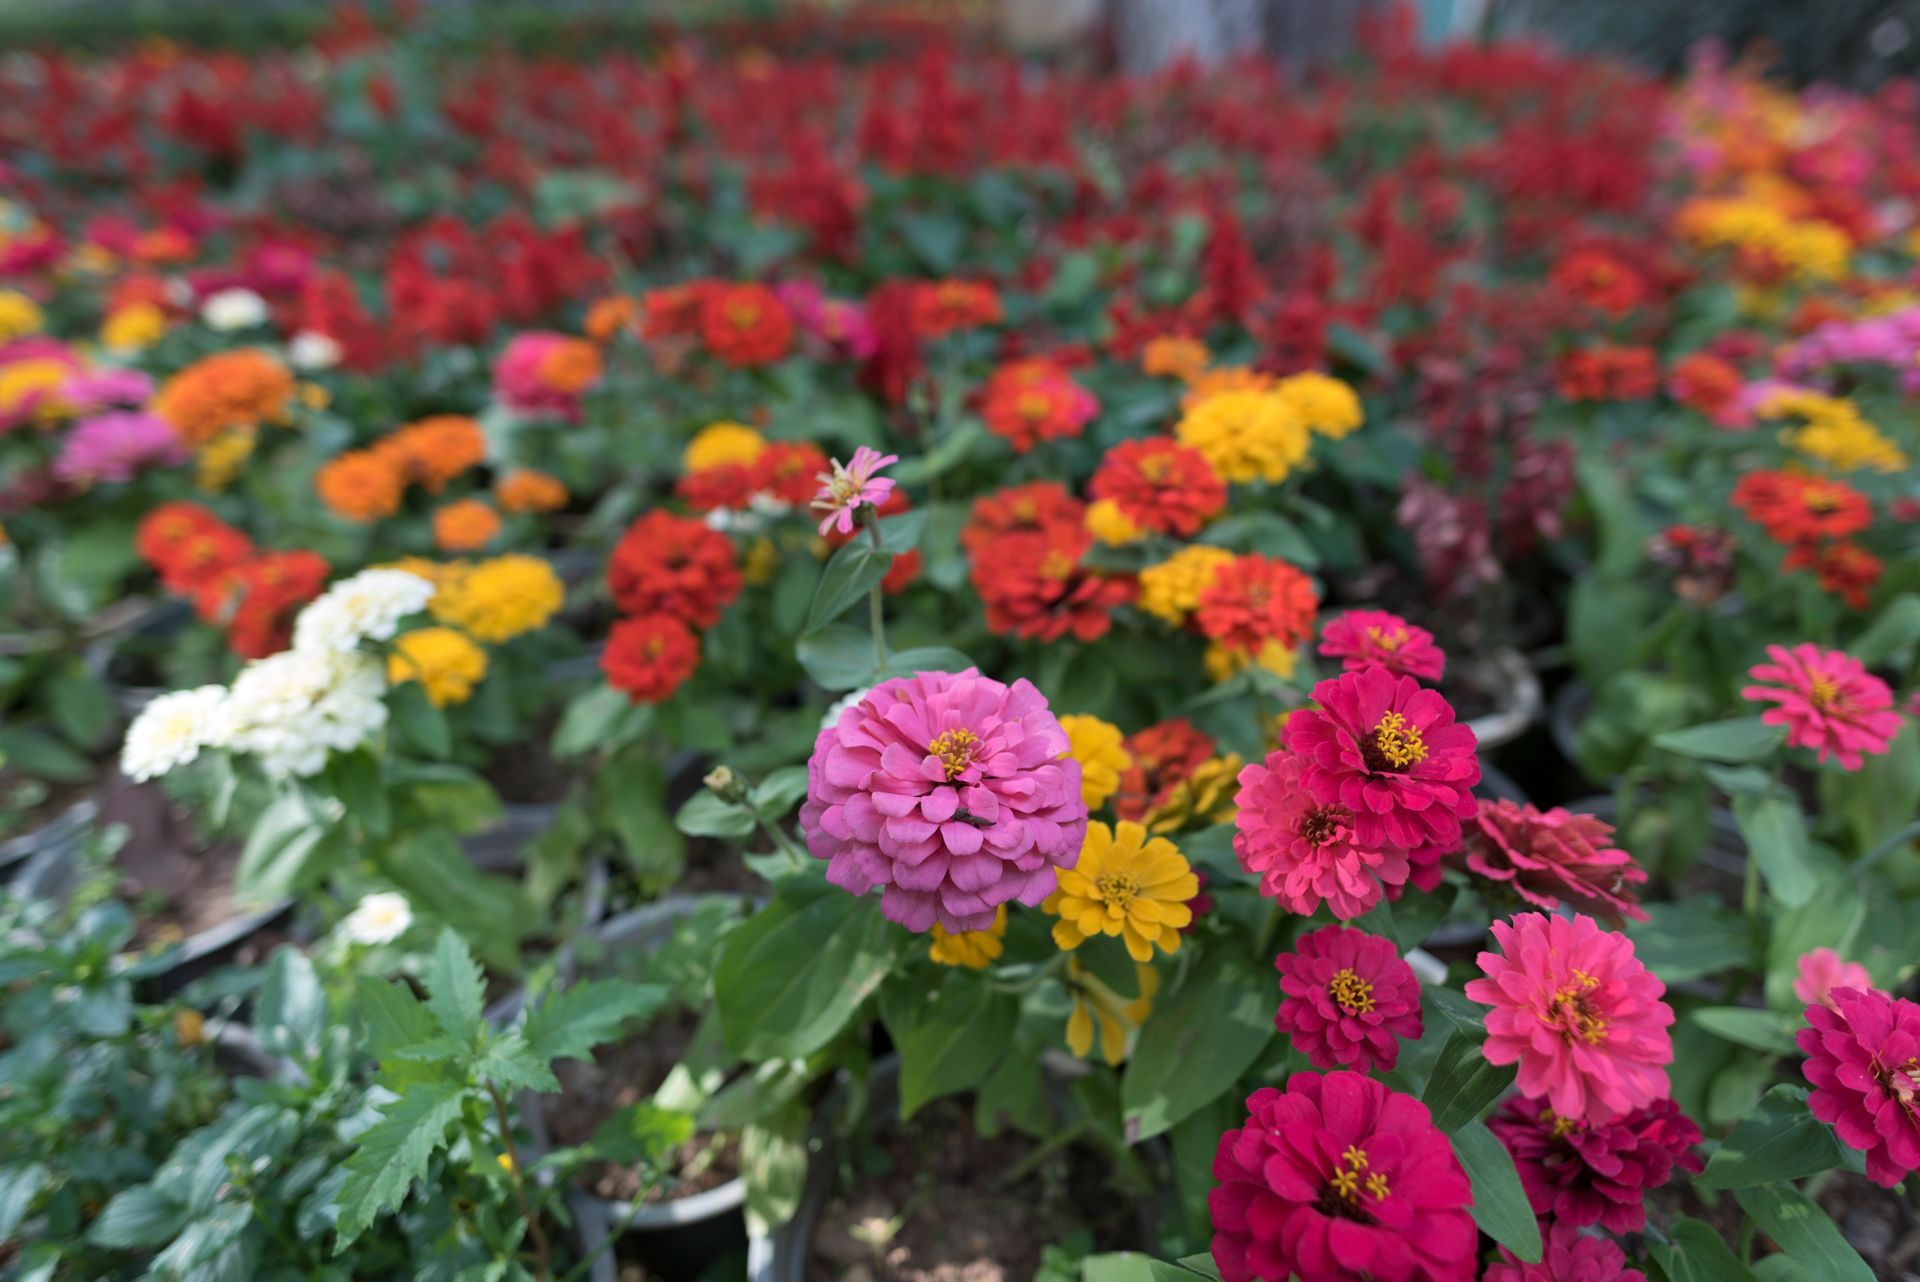 A field of colorful zinnias